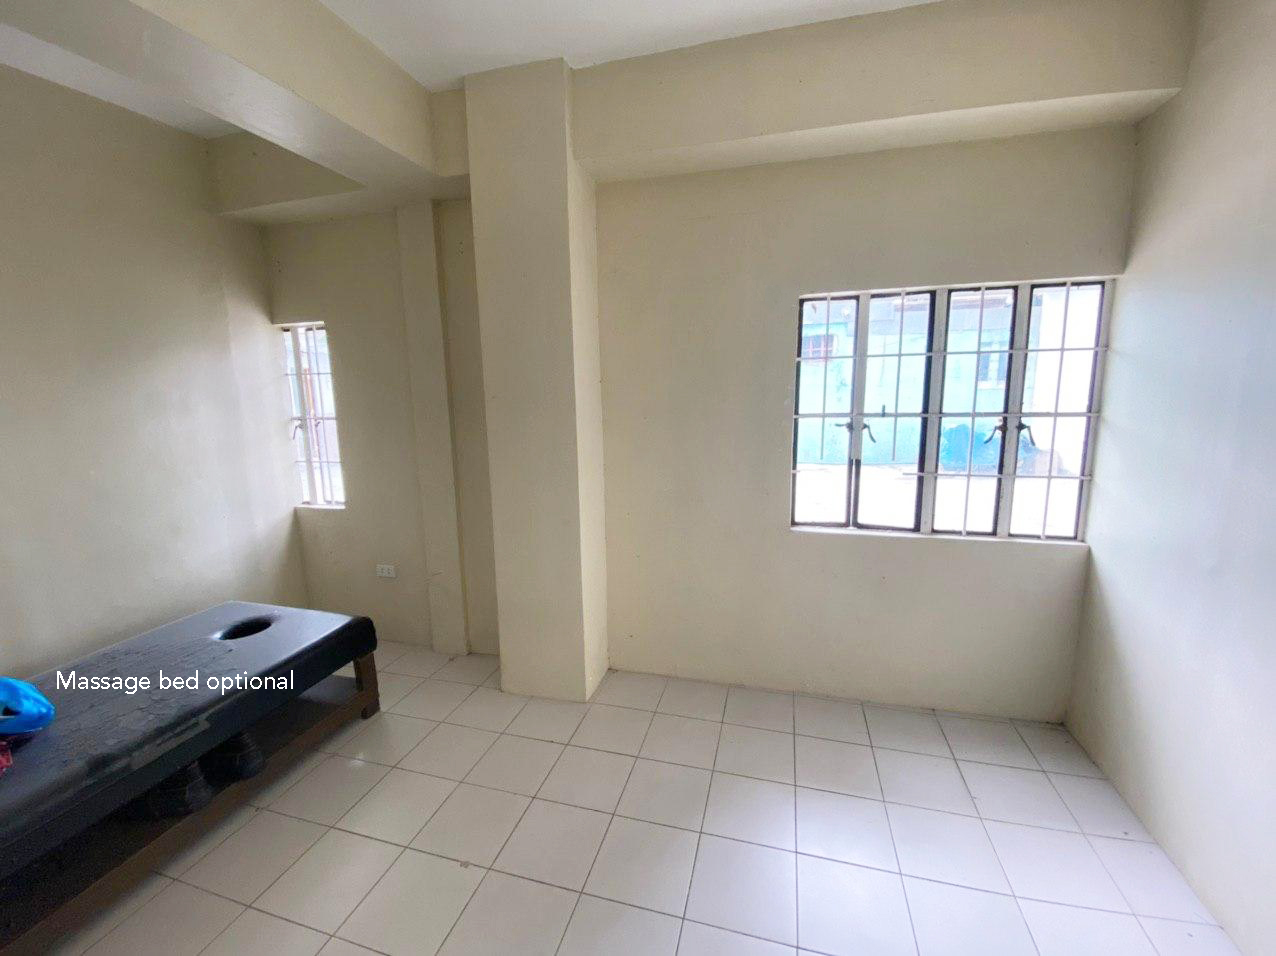 2 Bed Room Apartment Unit for Rent in San Fernando Pampanga